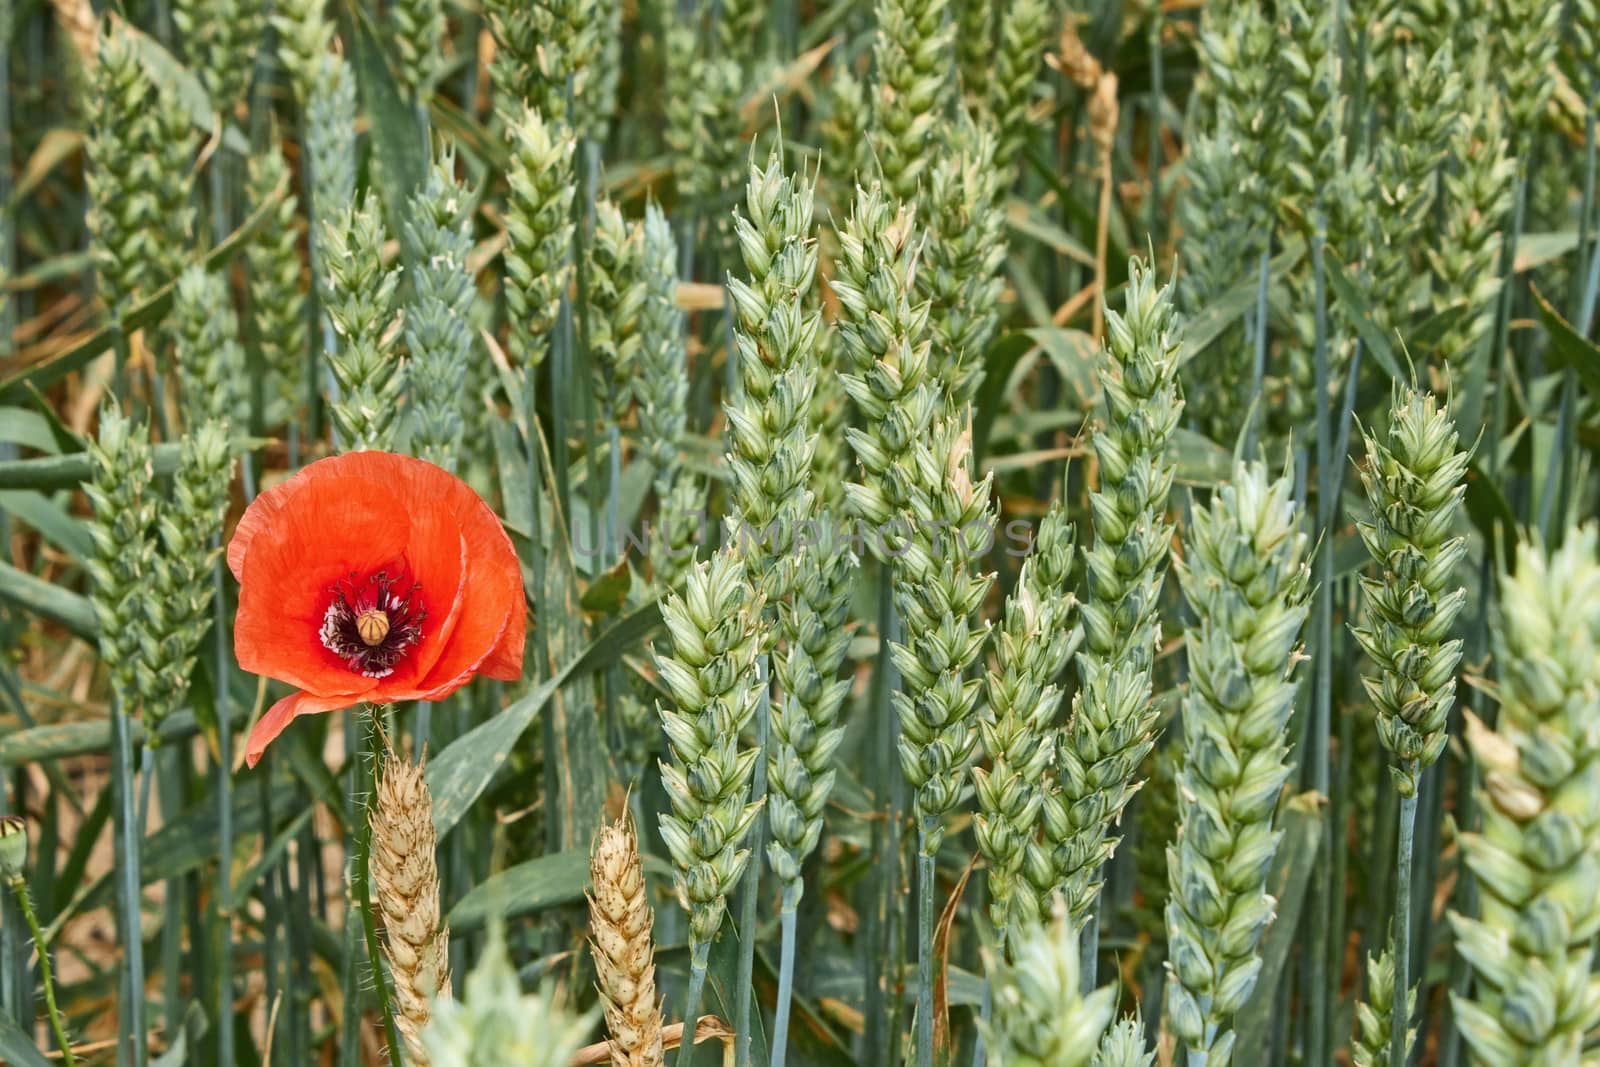 Red poppy flower among green wheat ears by qiiip